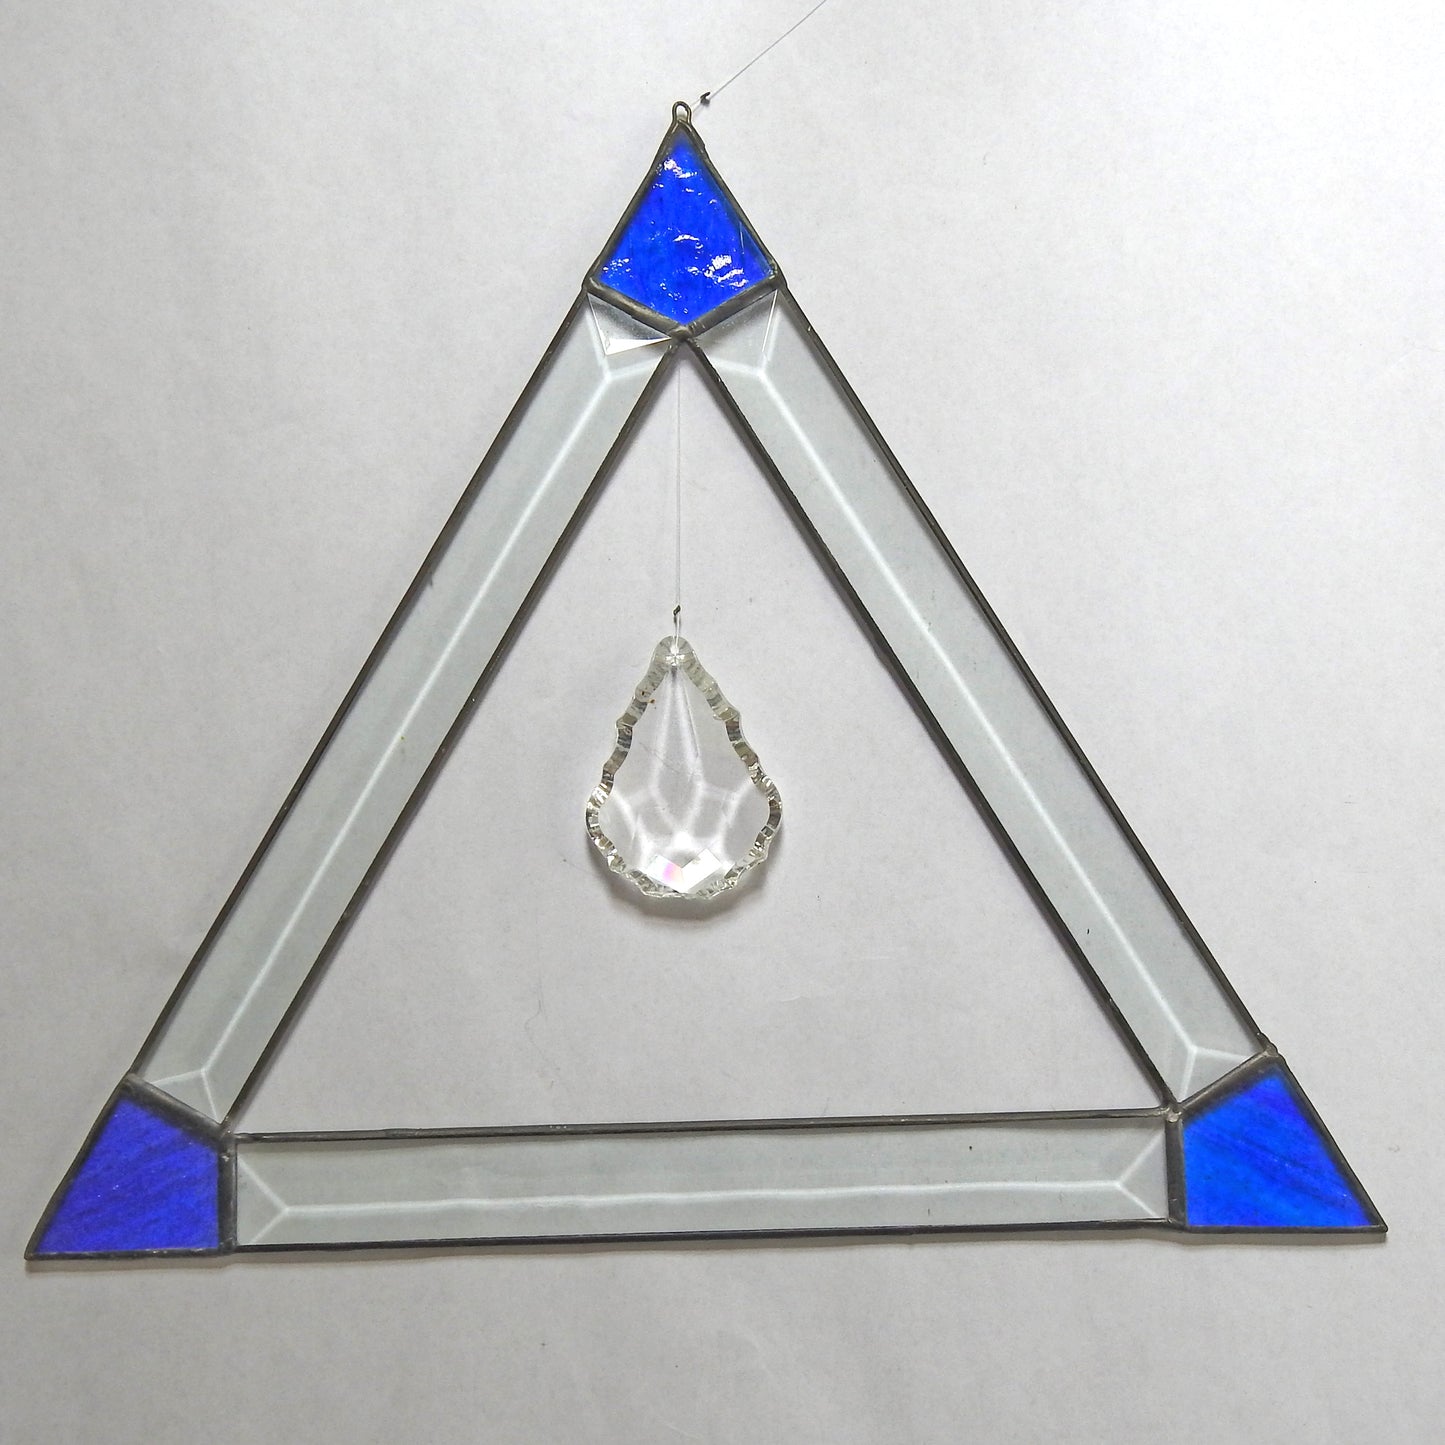 Beveled triangle with prism - large